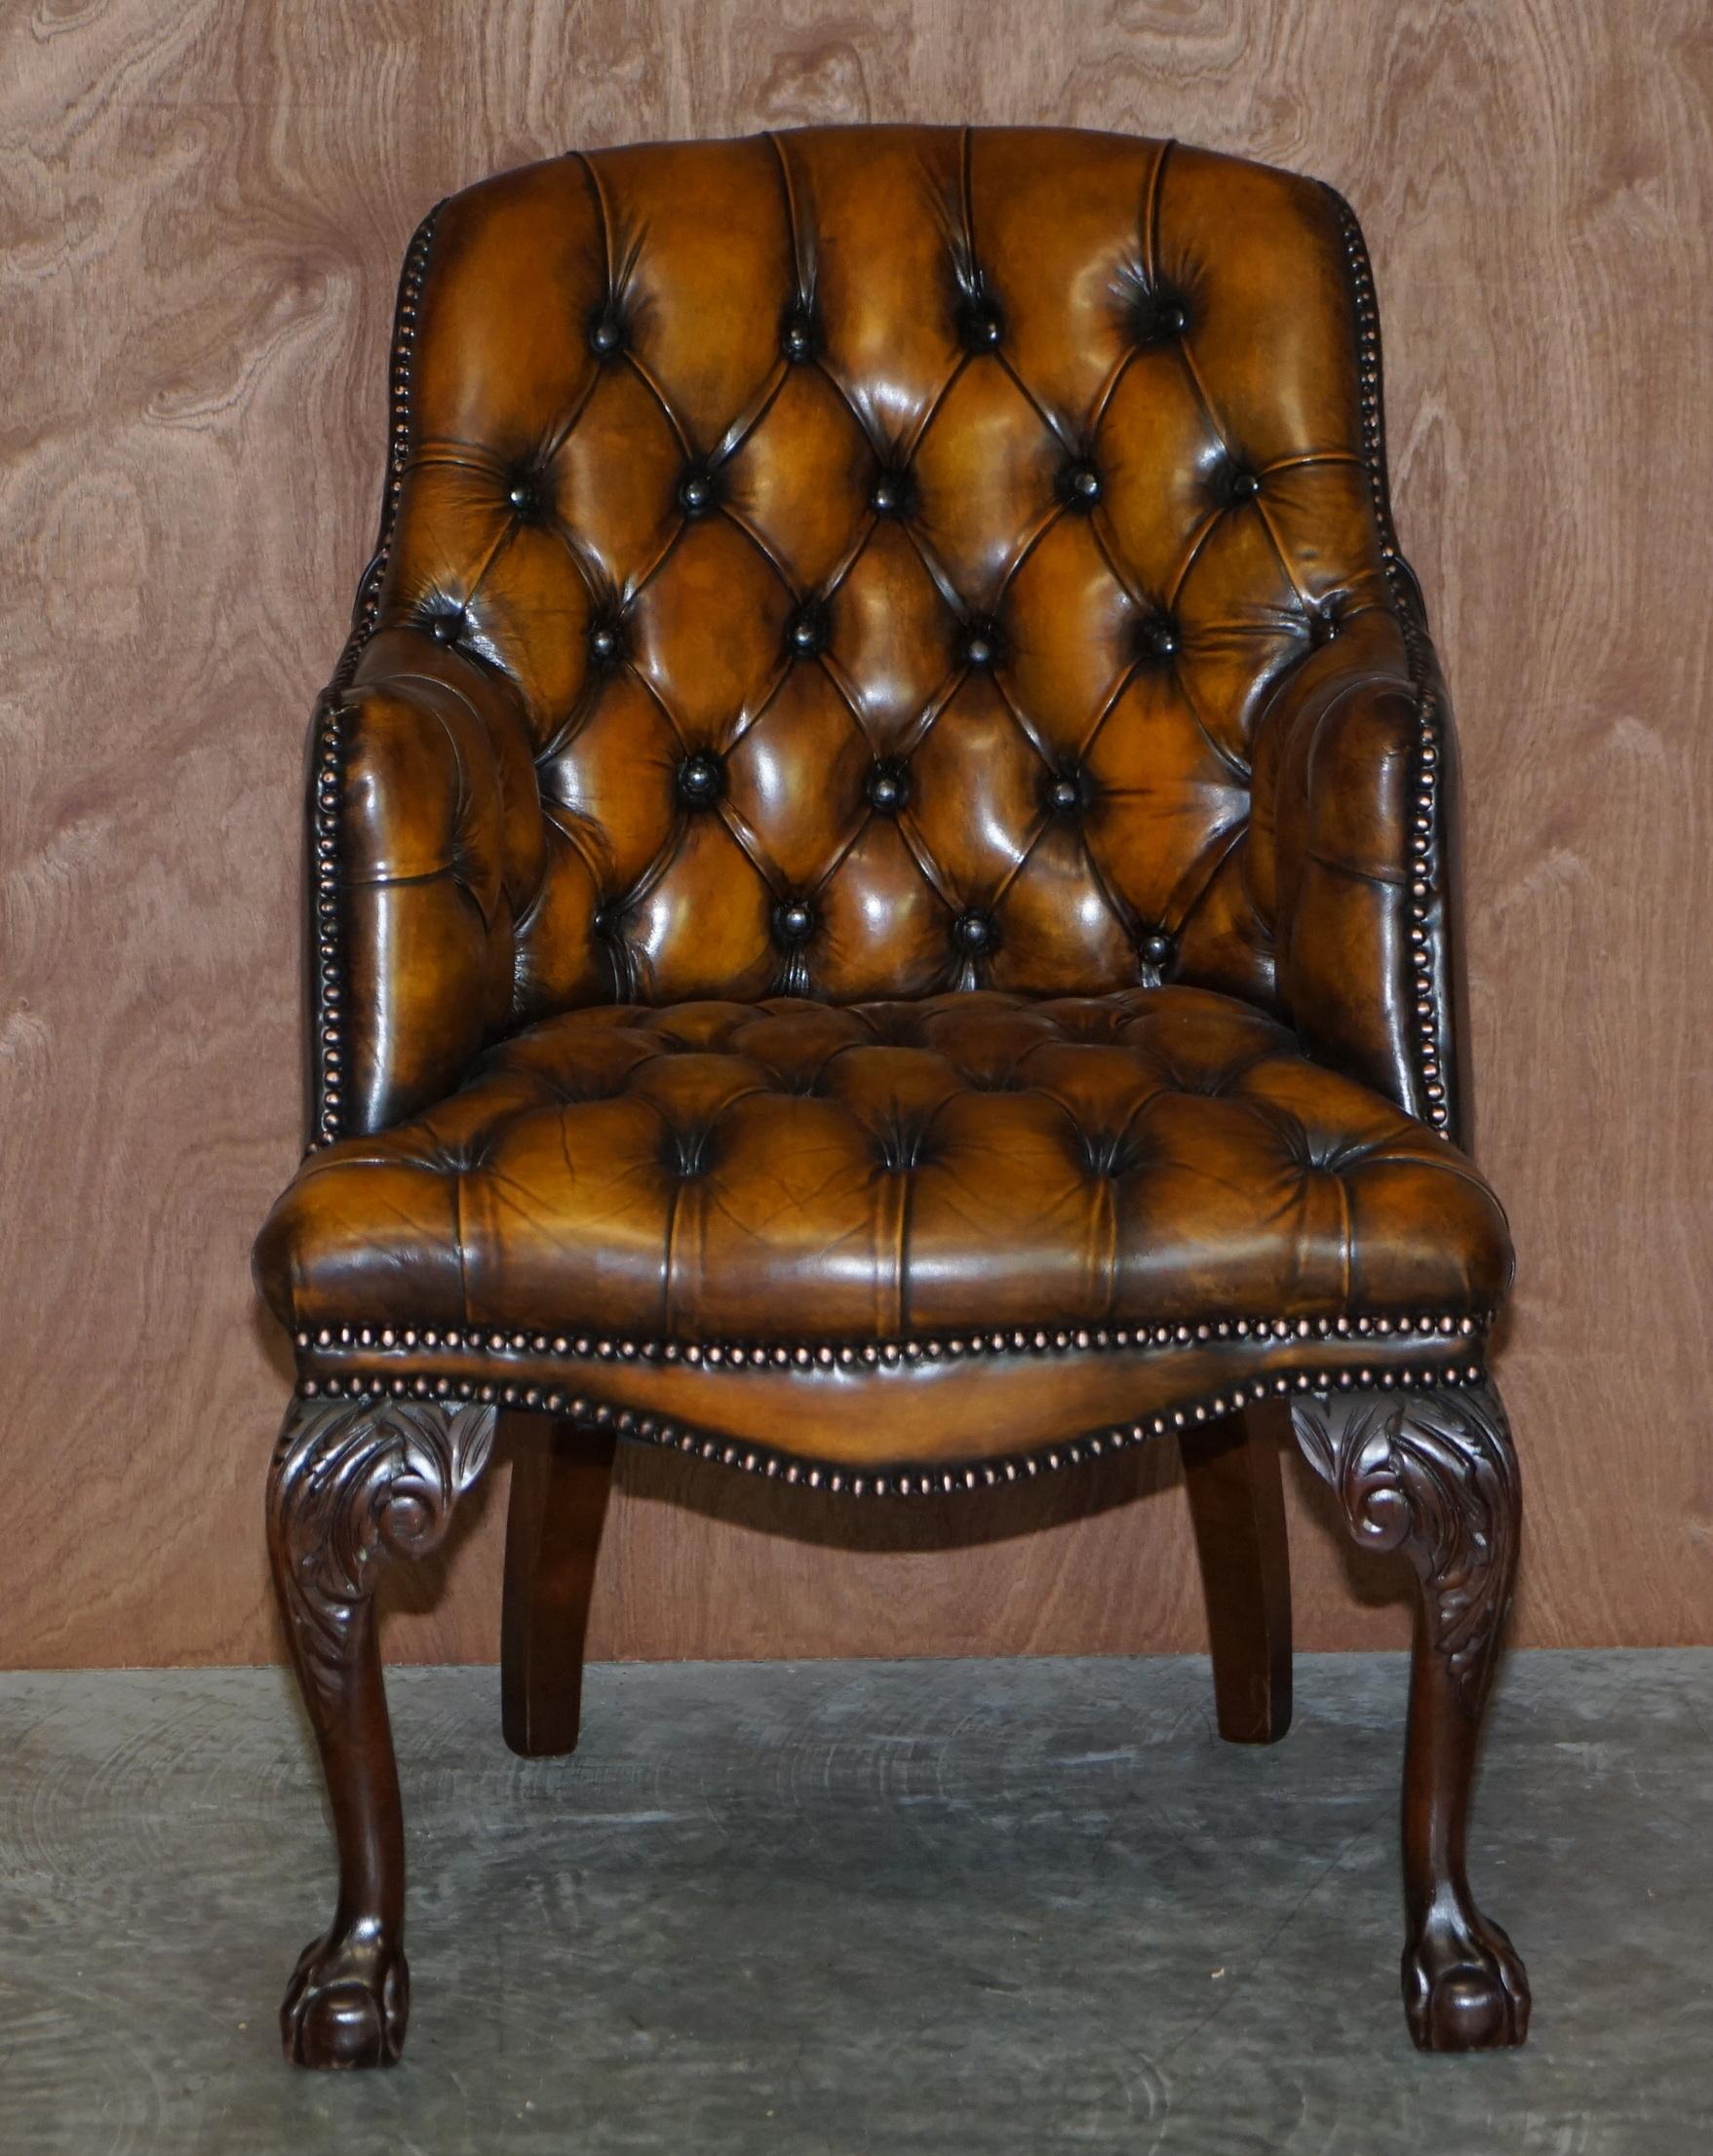 Royal House Antiques

Royal House Antiques is delighted to offer for sale this exceptionally rare original circa 1950’s Harrods London fully restored office or occasional armchair

Please note the delivery fee listed is just a guide, it covers